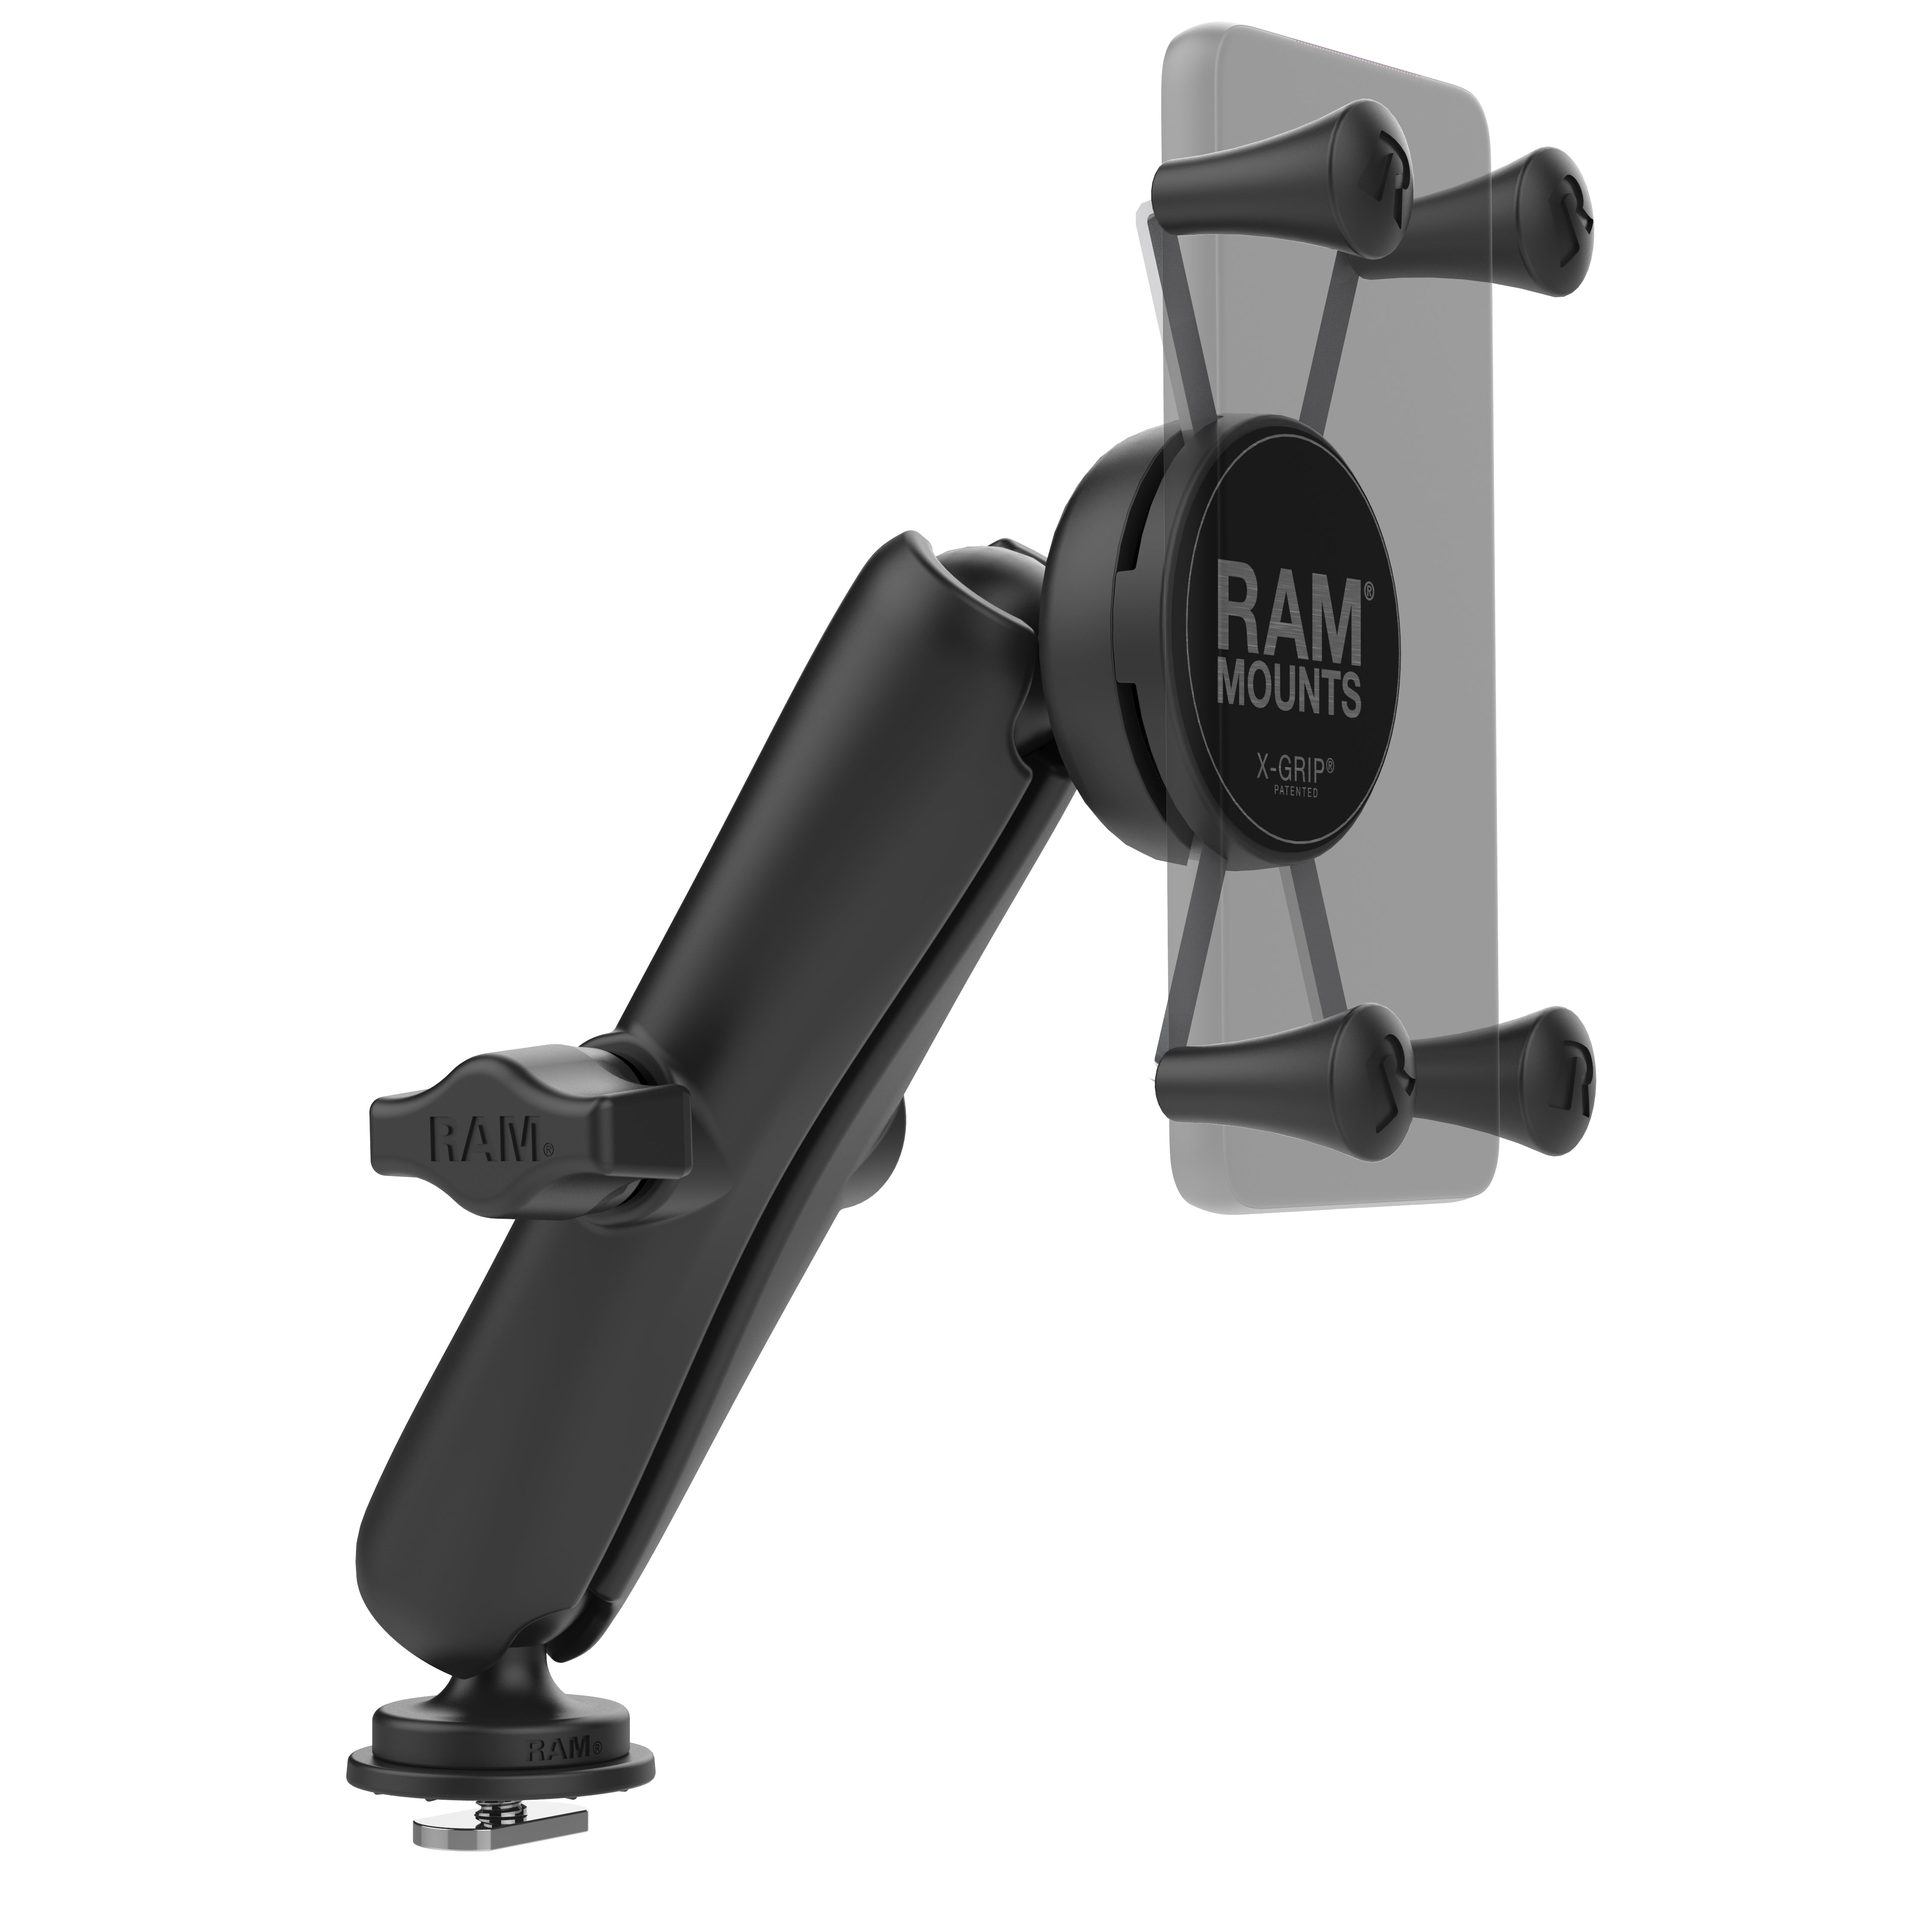  RAM Mounts RAP-HOL-UN7B-201U X-Grip Phone Holder with Composite  Double Socket Arm(Medium) Compatible with RAM B Size 1 Ball Components :  Cell Phones & Accessories